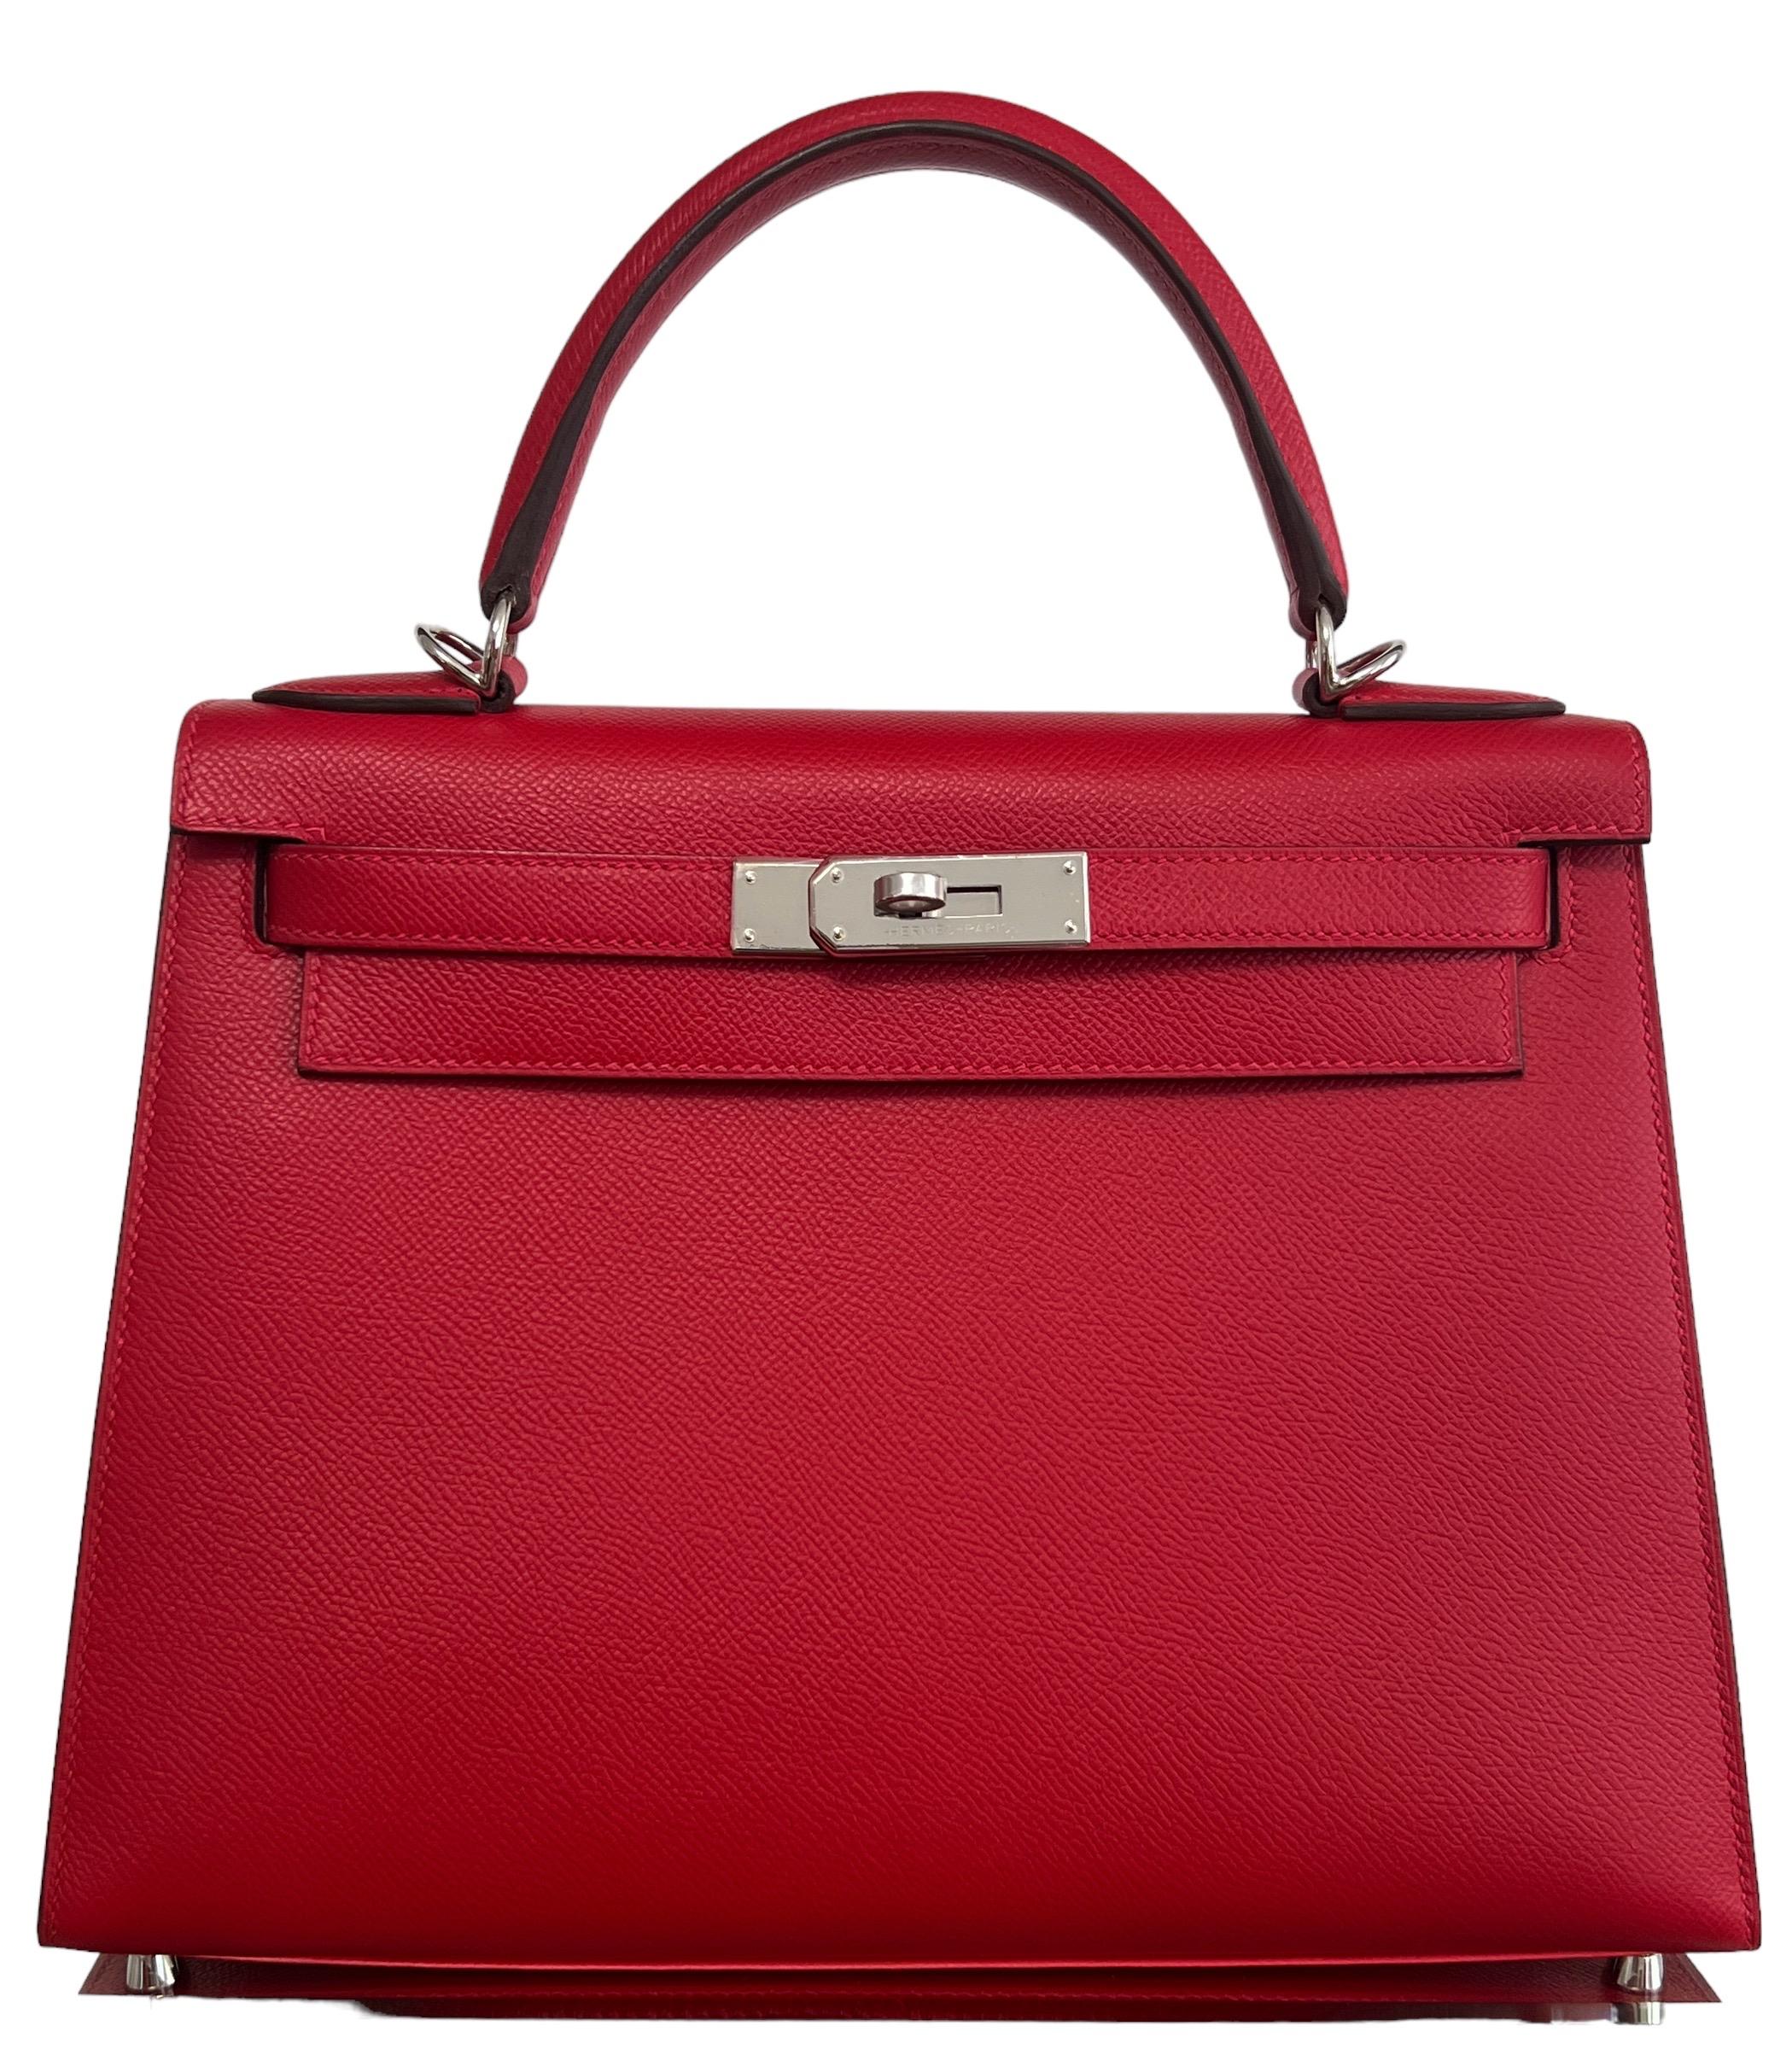 Beautiful As New 2020 Hermes Kelly 28 Sellier Rouge Casaque Epsom Leather. Complimented by Palladium Hardware. Excellent Pristine Condition with Plastic on Hardware. 2020 Y Stamp. 

Shop with Confidence from Lux Addicts. Authenticity Guaranteed!